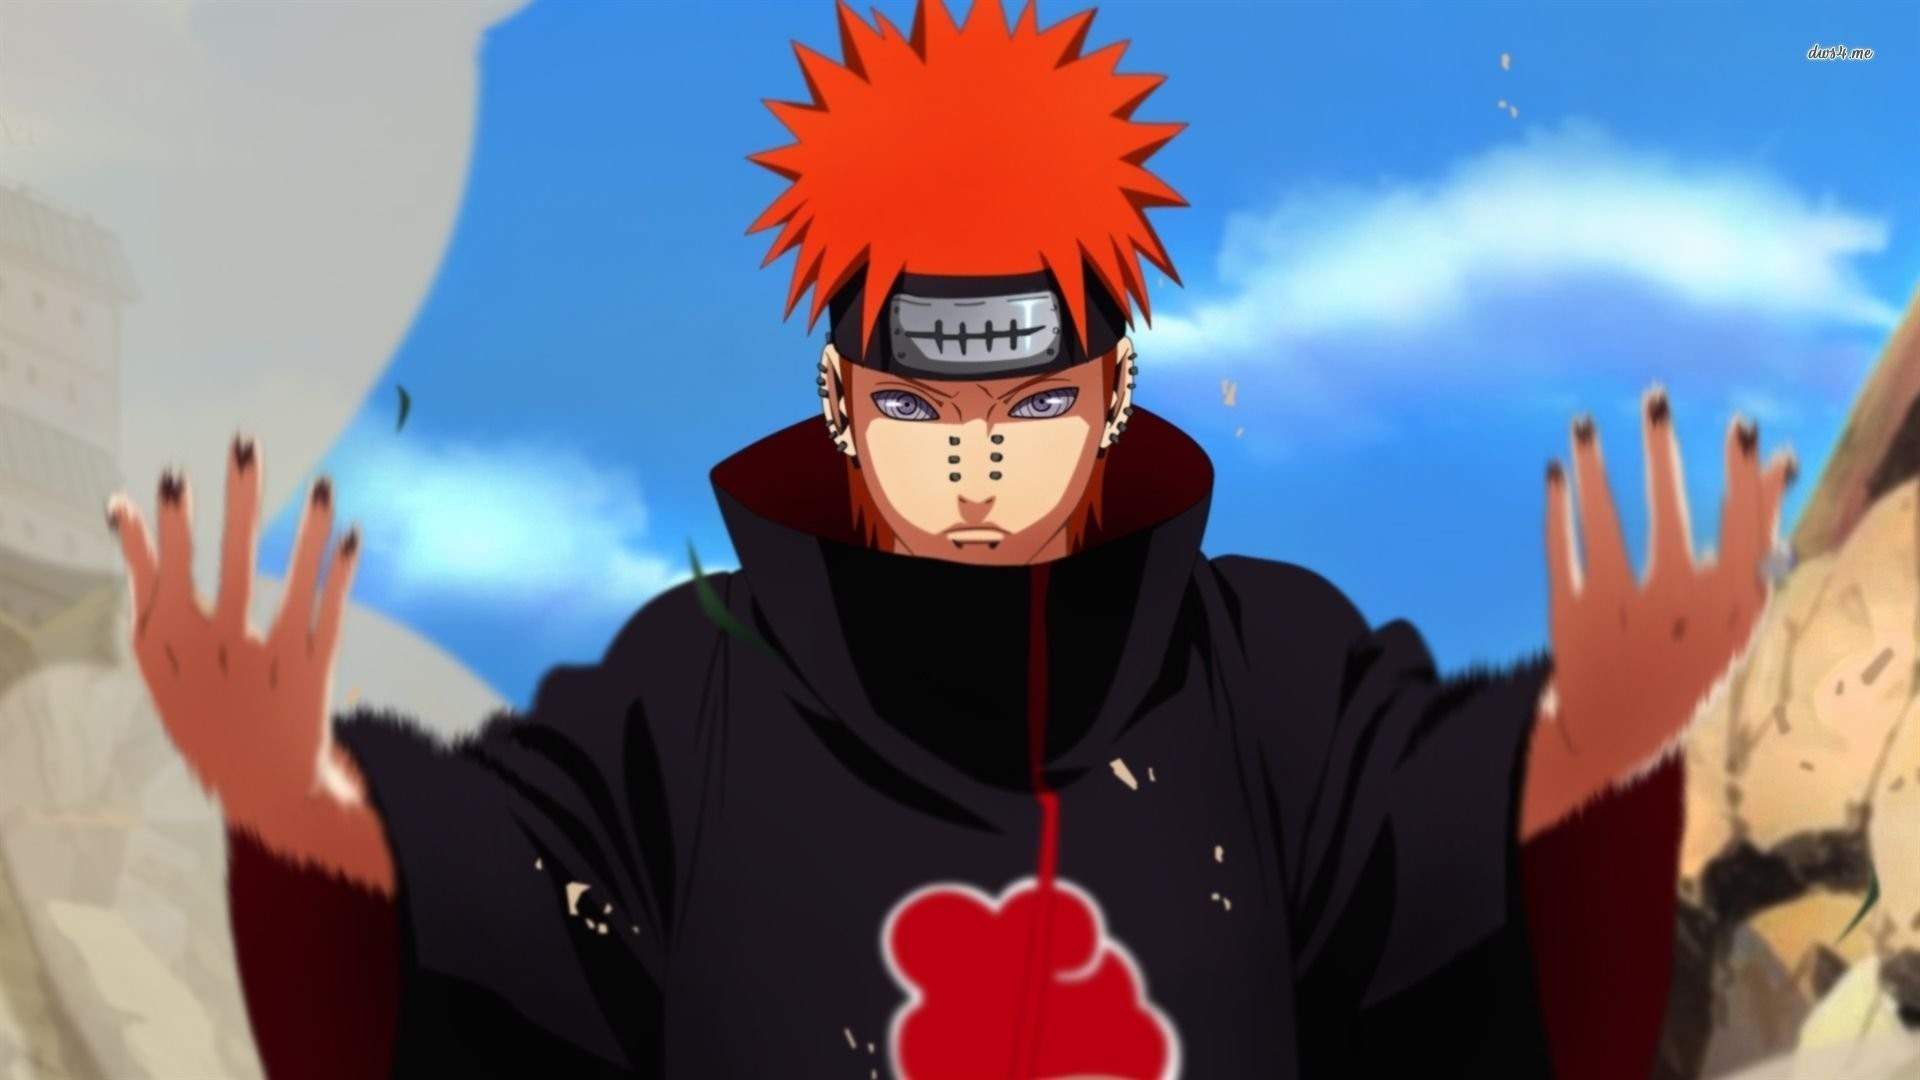 1920x1080 Perfect Naruto Shippuden Pain Wallpaper Free Wallpaper For Desktop and  Mobile in All